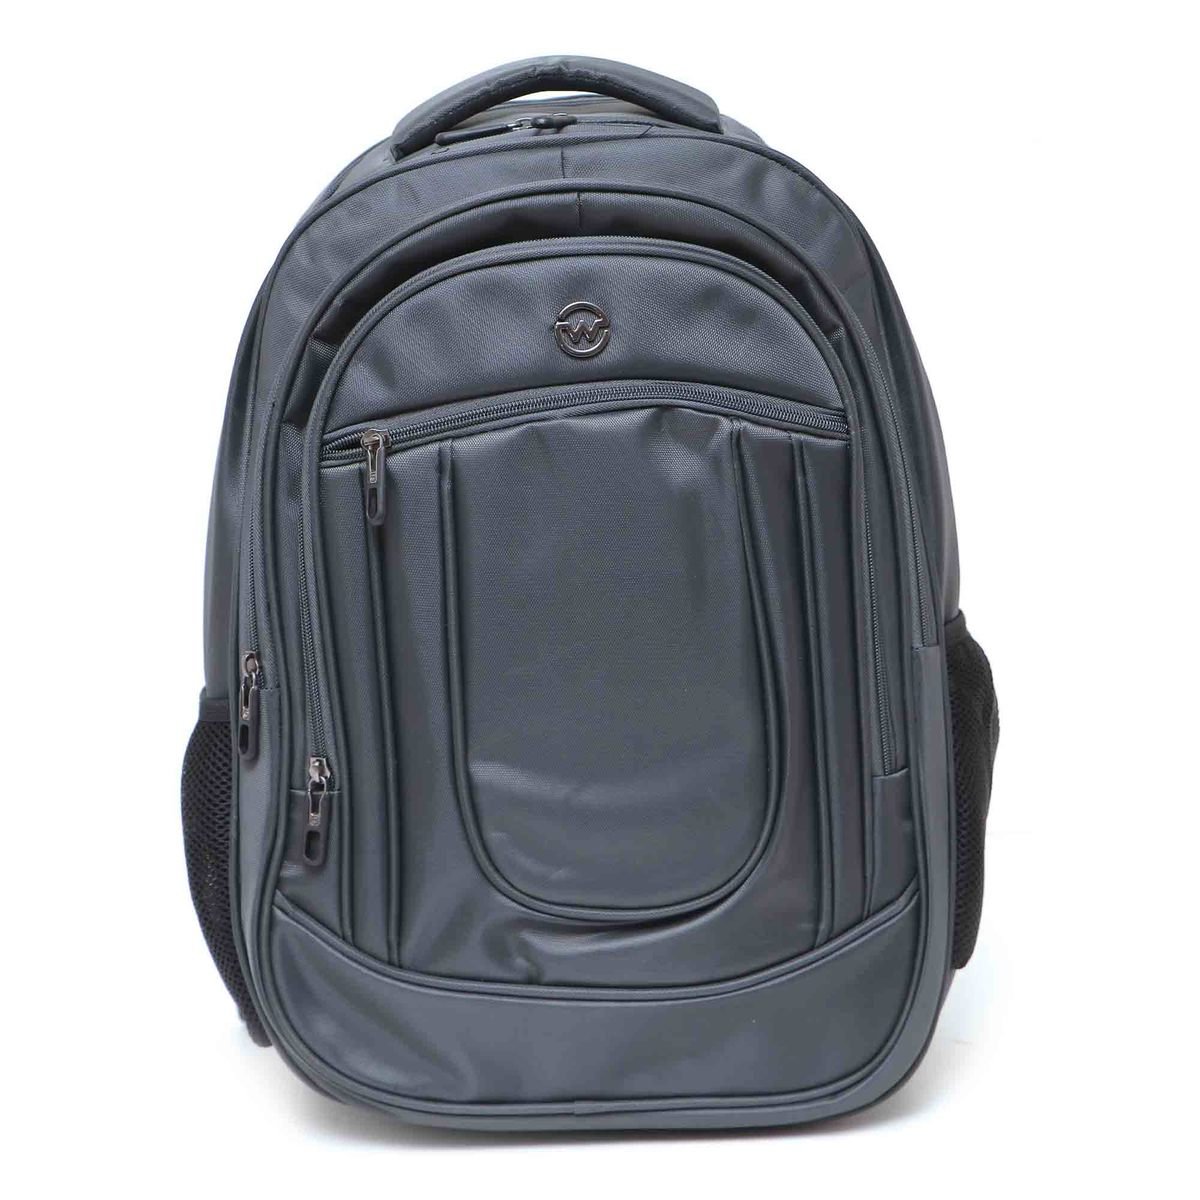 Wagon-R Multi Backpack 19inch 7815-2 Assorted